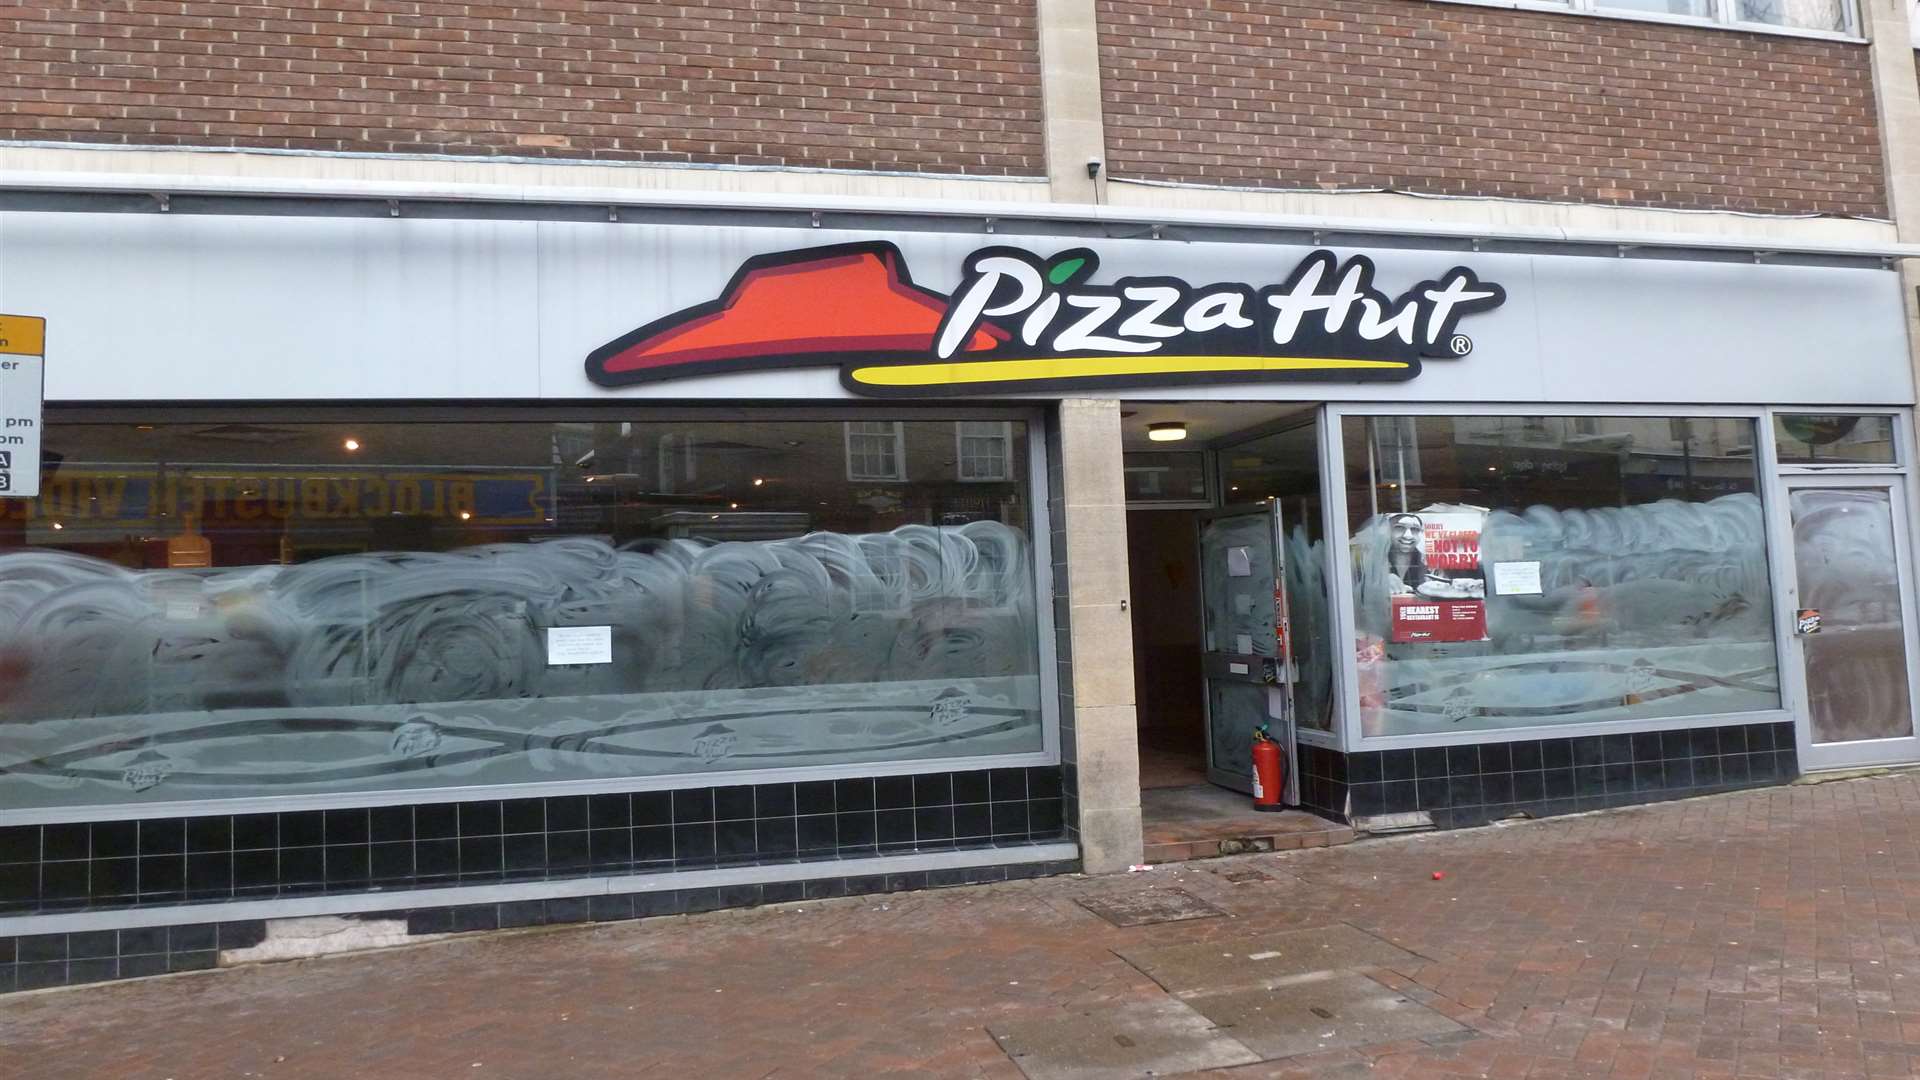 The former Pizza Hut restaurant closed in 2013